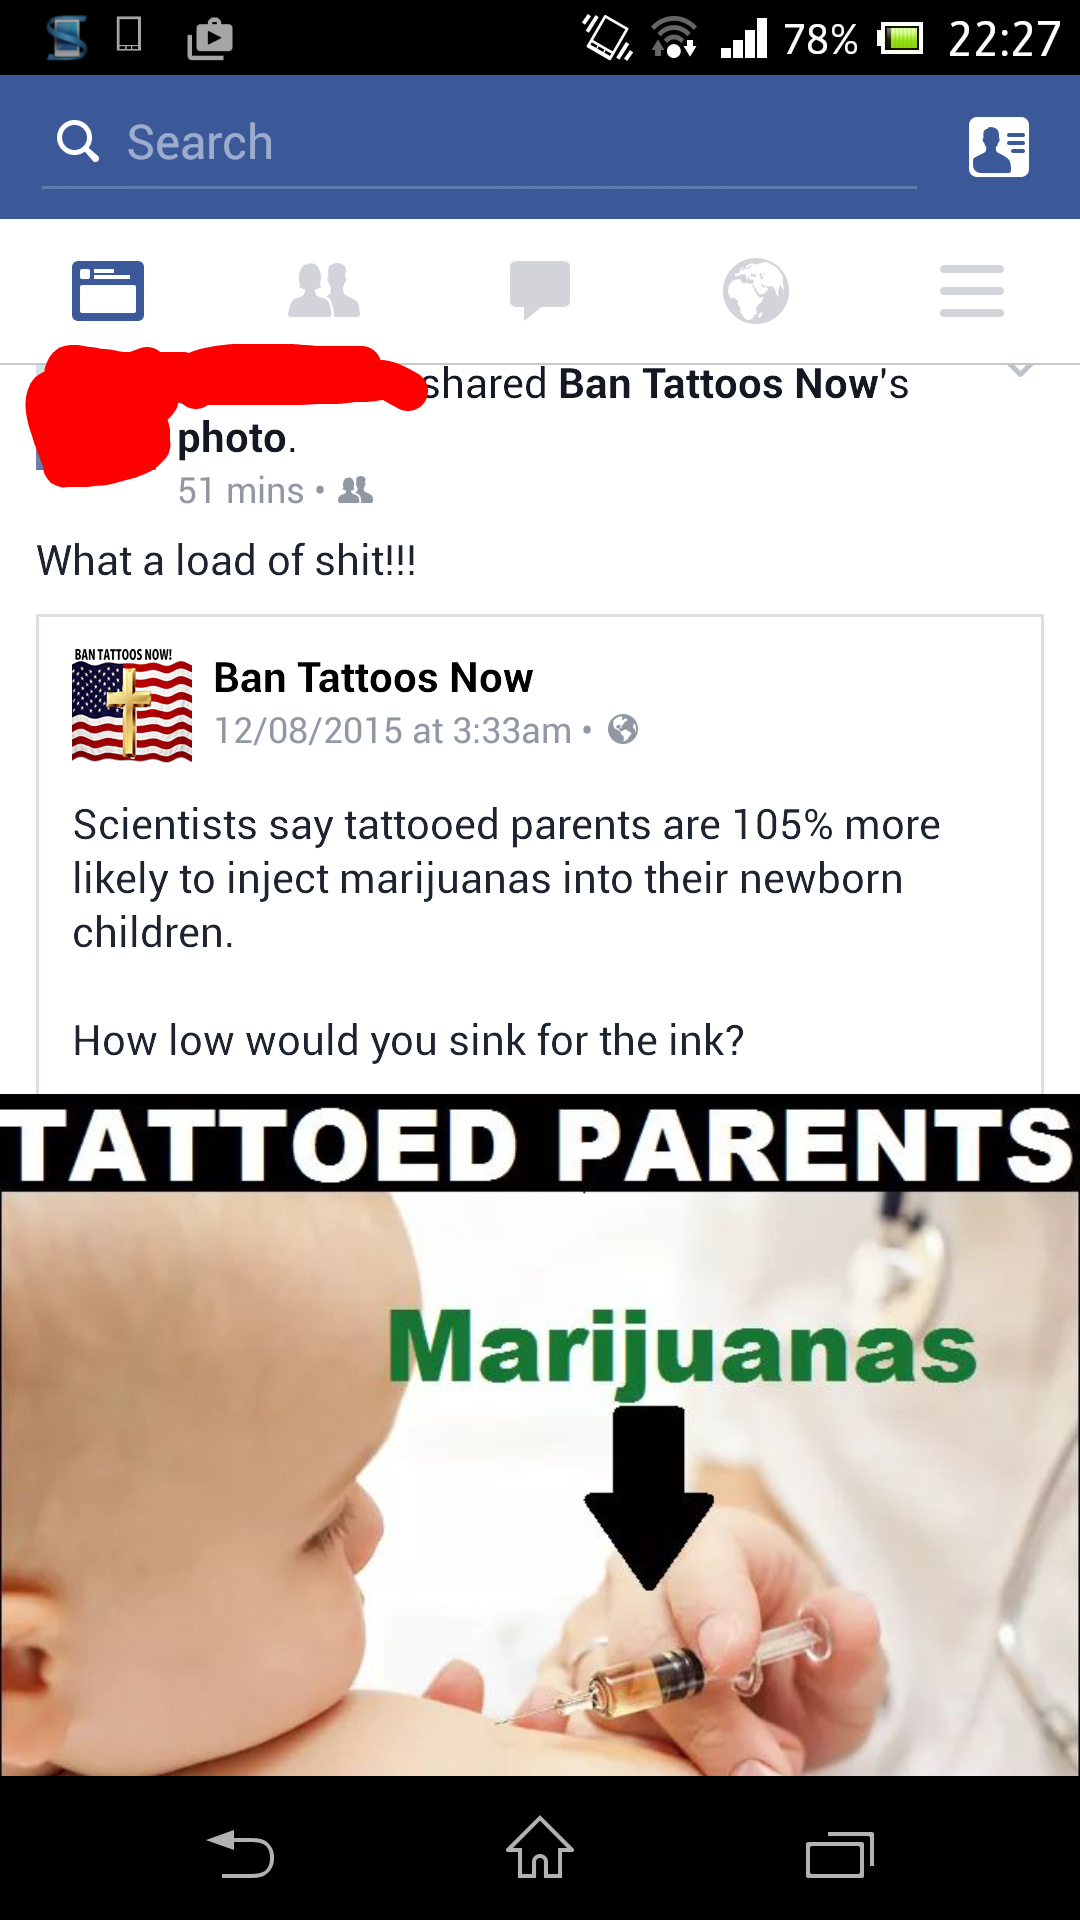 People with tattoos 105% more likely to inject their children with marijuanas